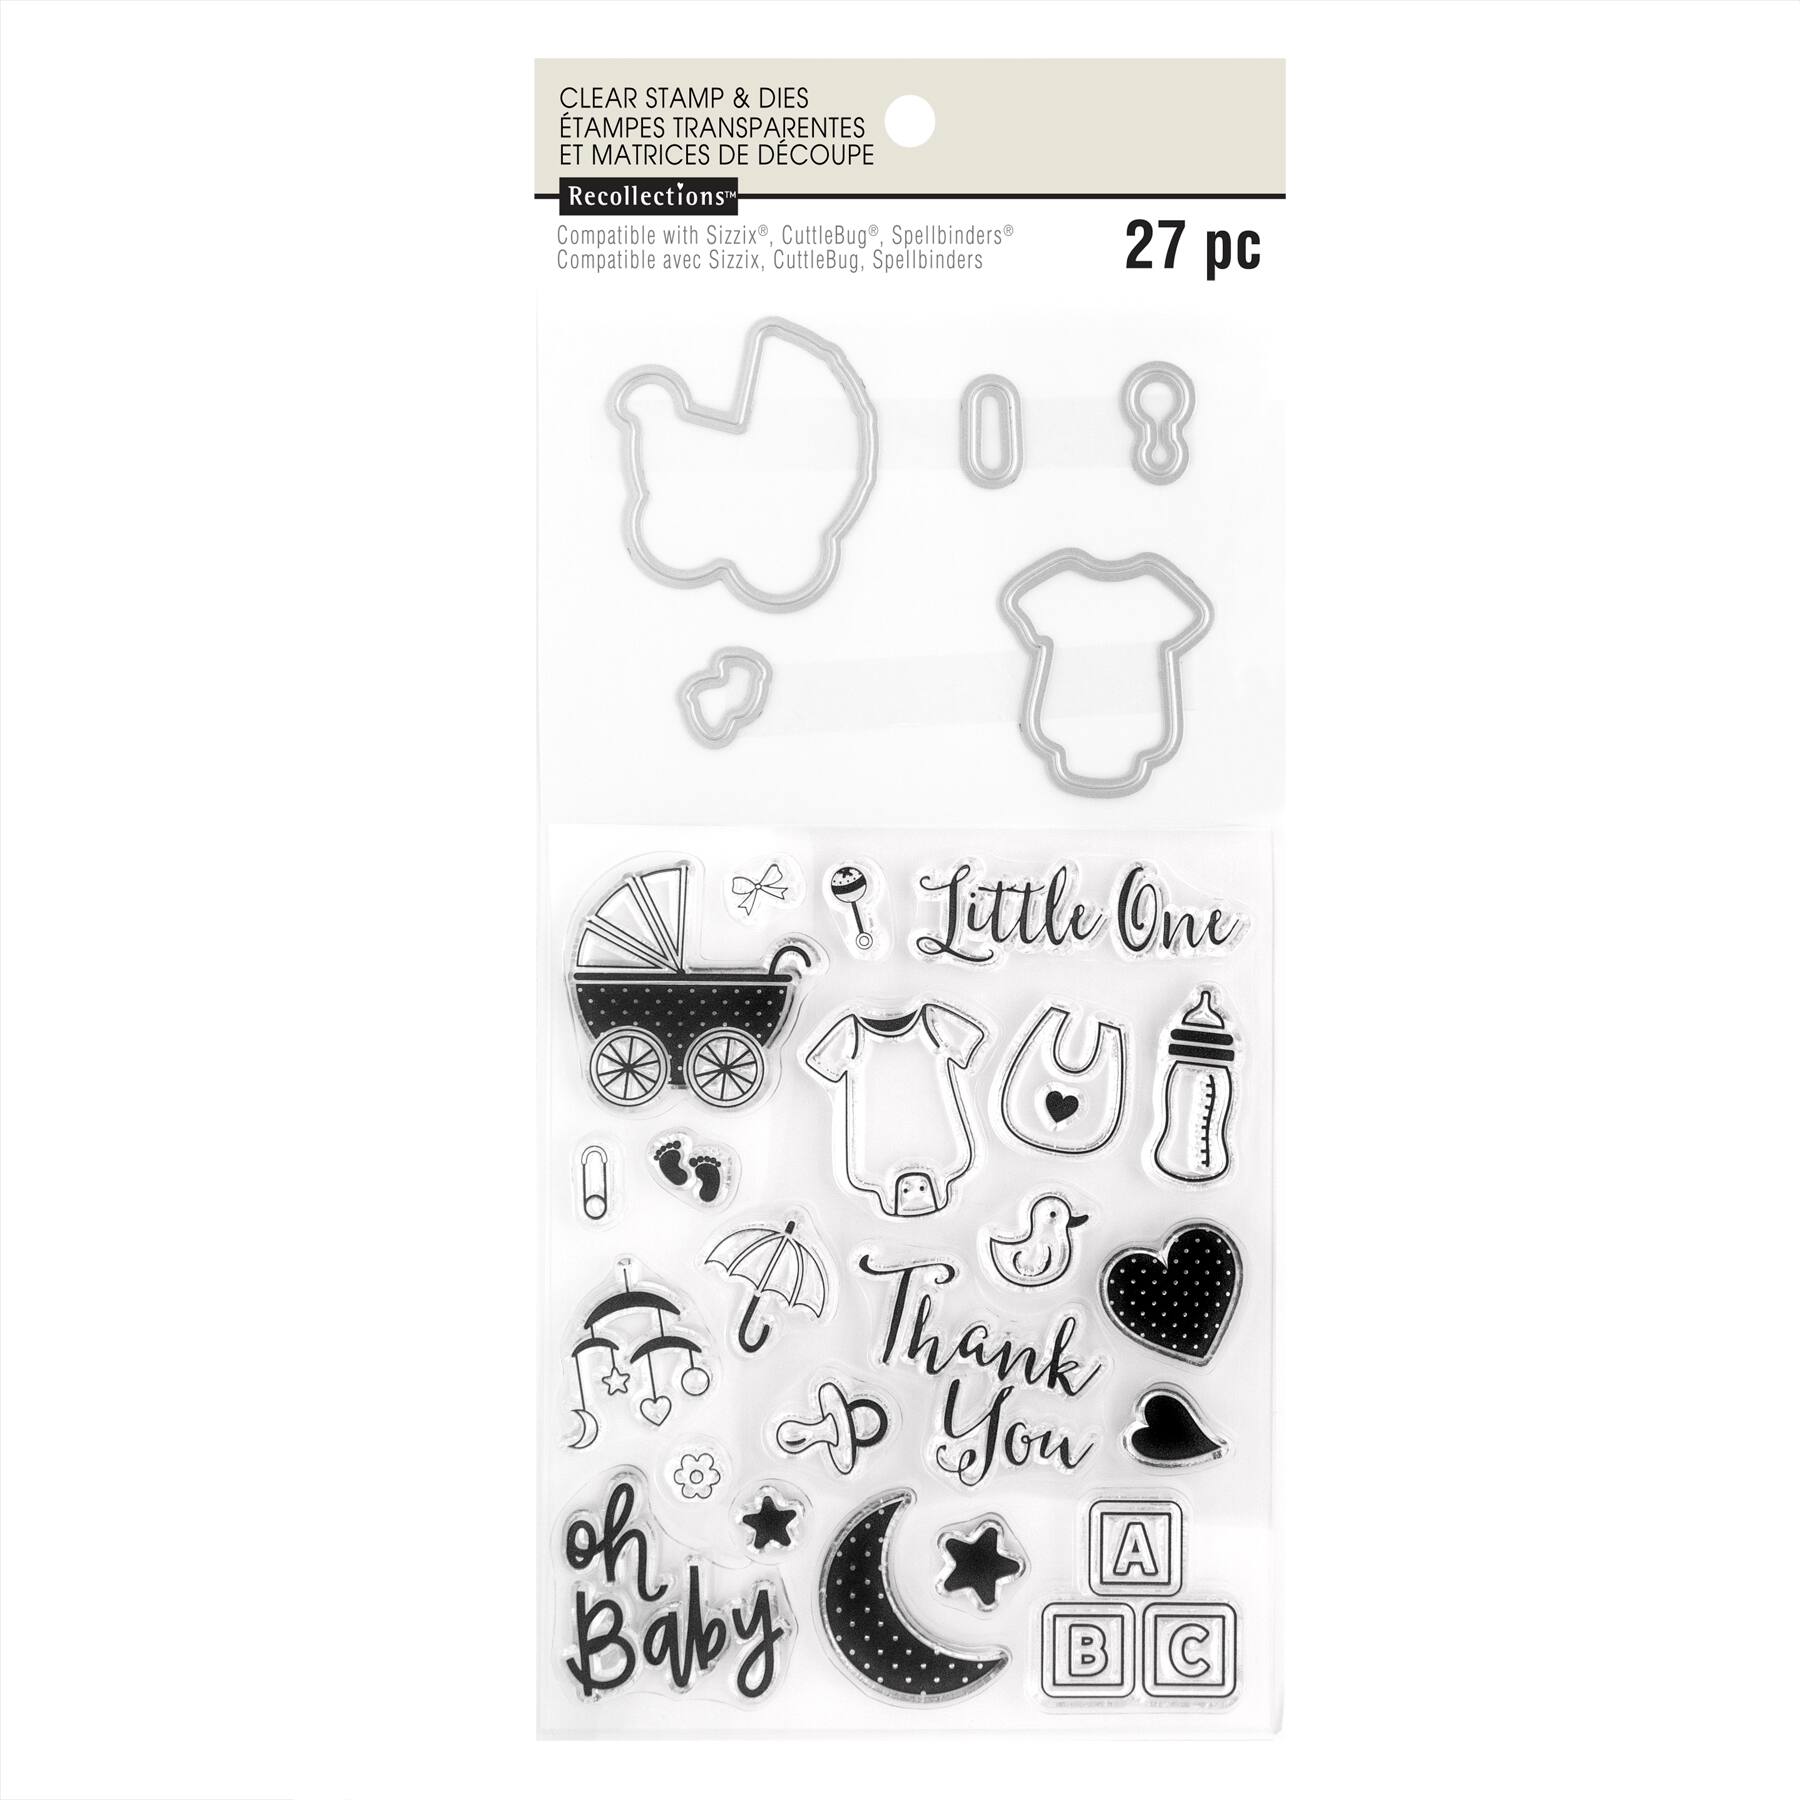 Shop for the Baby Clear Stamp & Die Set by Recollections™ at Michaels